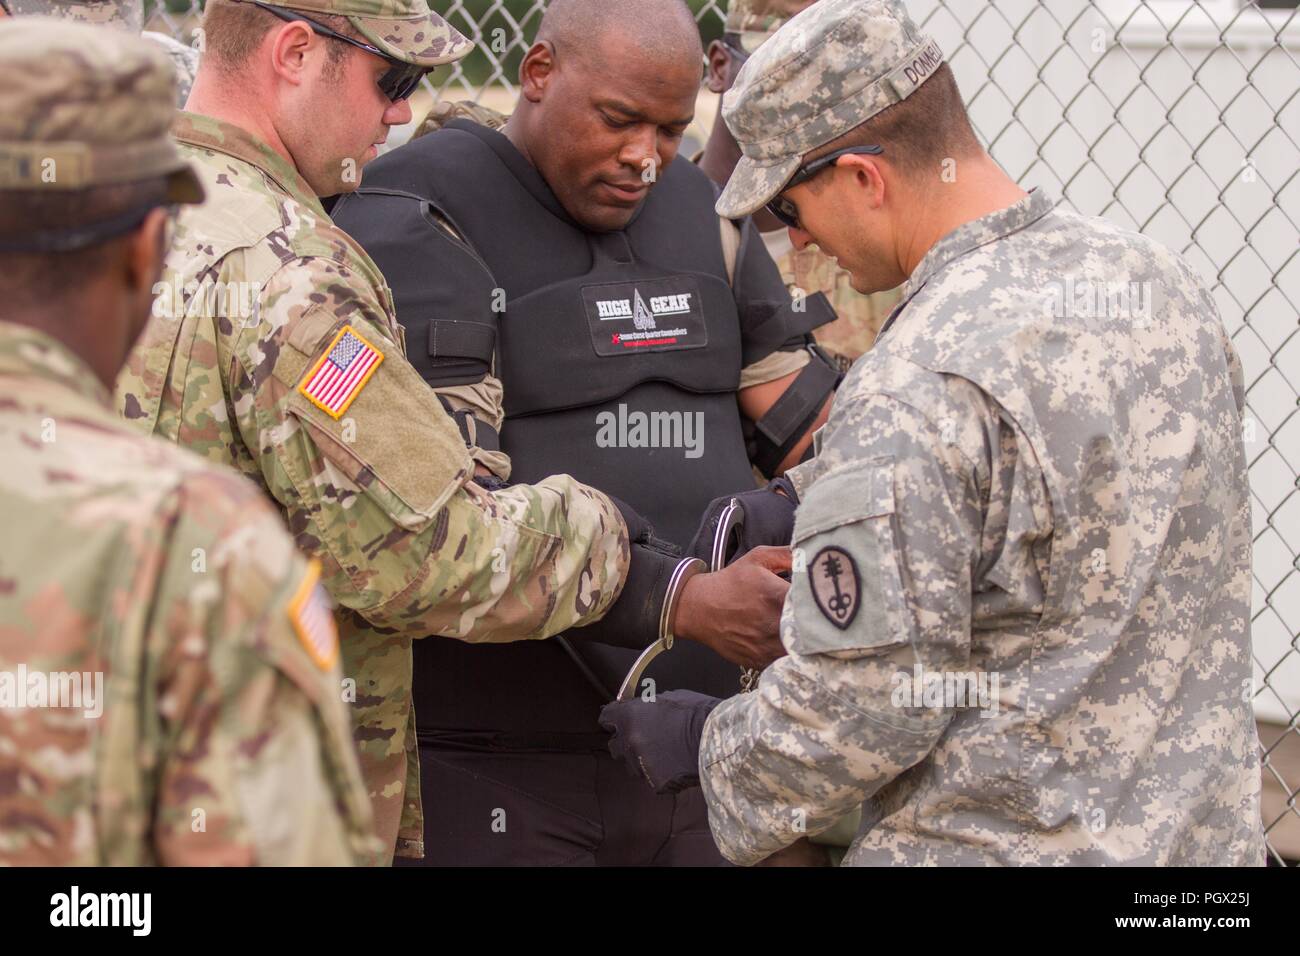 U.S. Army Military Police Soldiers securing a detainee with handcuffs, role-played by Sgt. 1st Class Marcus Brown, during Combat Support Training Exercise (CSTX) at Fort McCoy, Wisconsin, August 20, 2018. Image courtesy Spc. Cody Hein / 86th Training Division. () Stock Photo